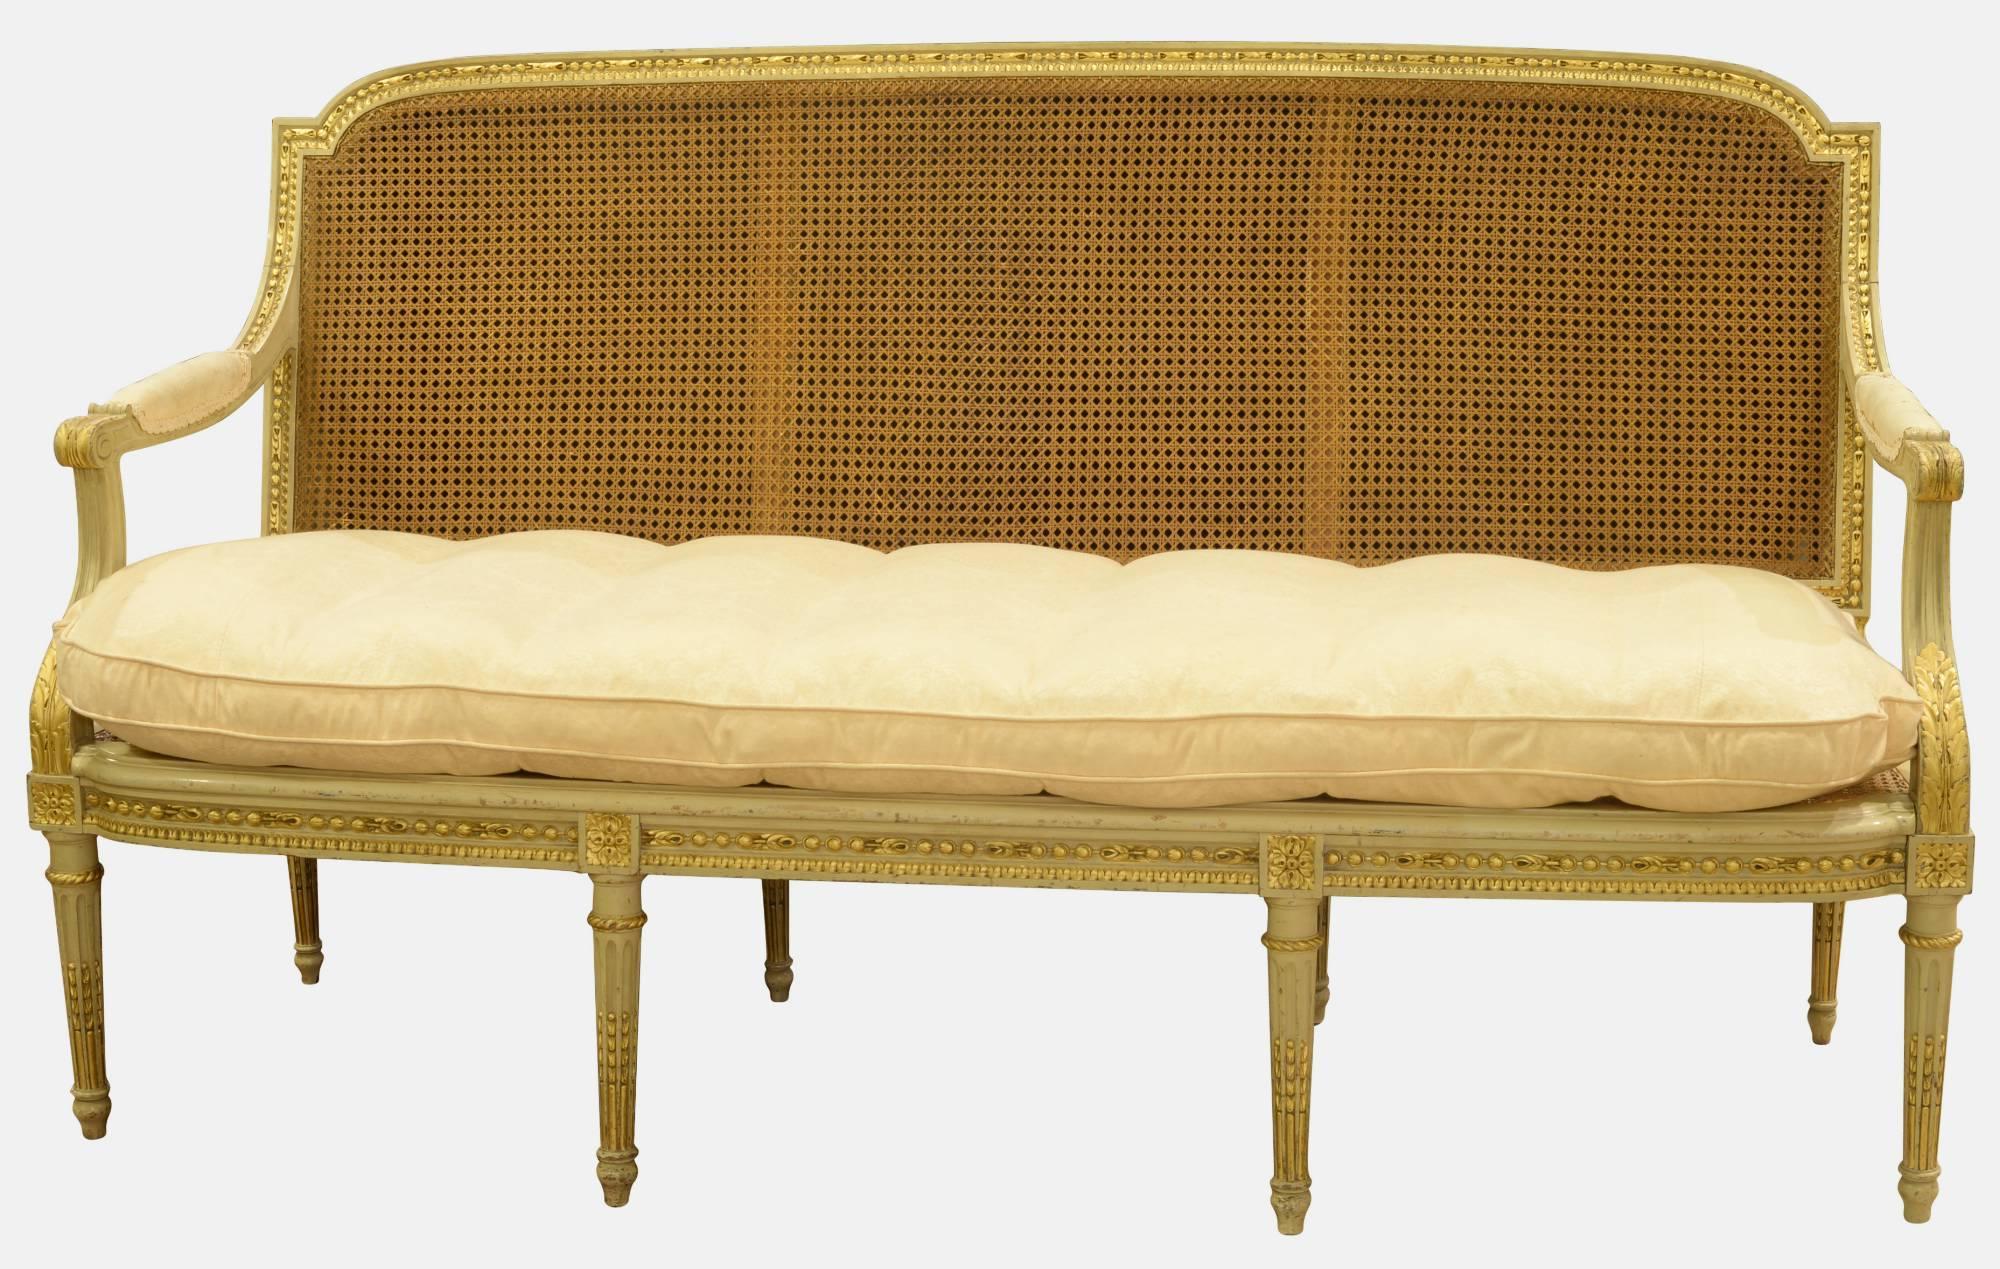 French Louis XVI style painted and gilded sofa on turned, fluted legs with caned seat and back. With squab cushion, circa 1900.